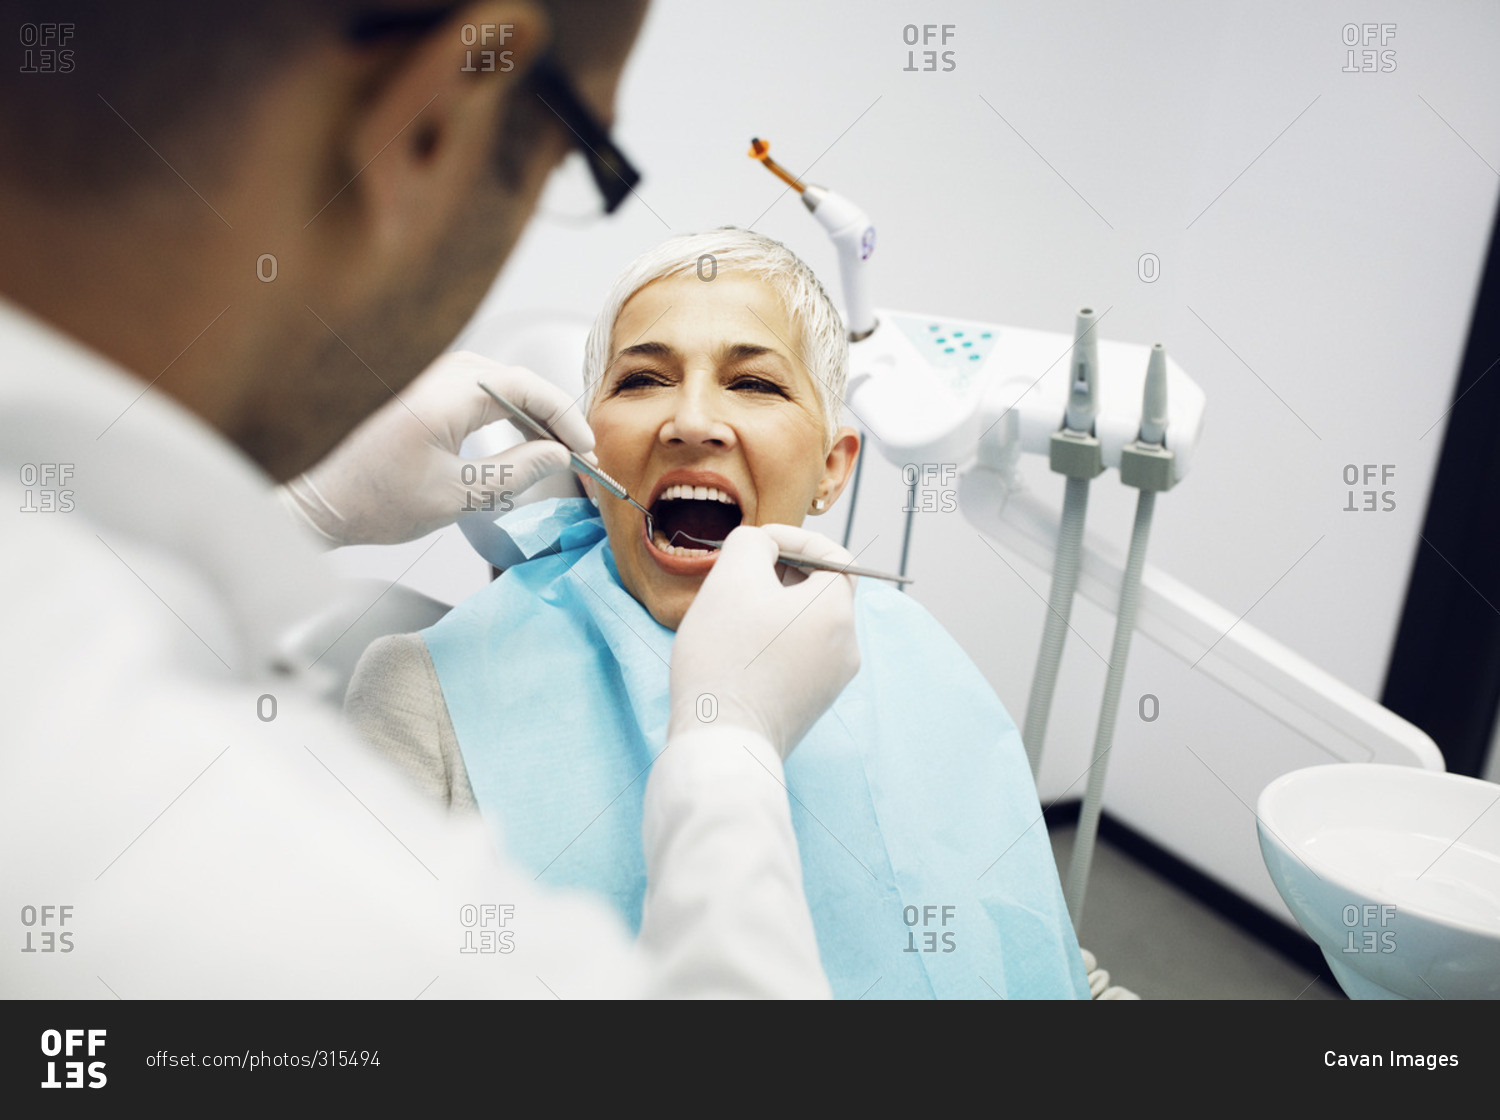 Woman getting a checkup at the dentist